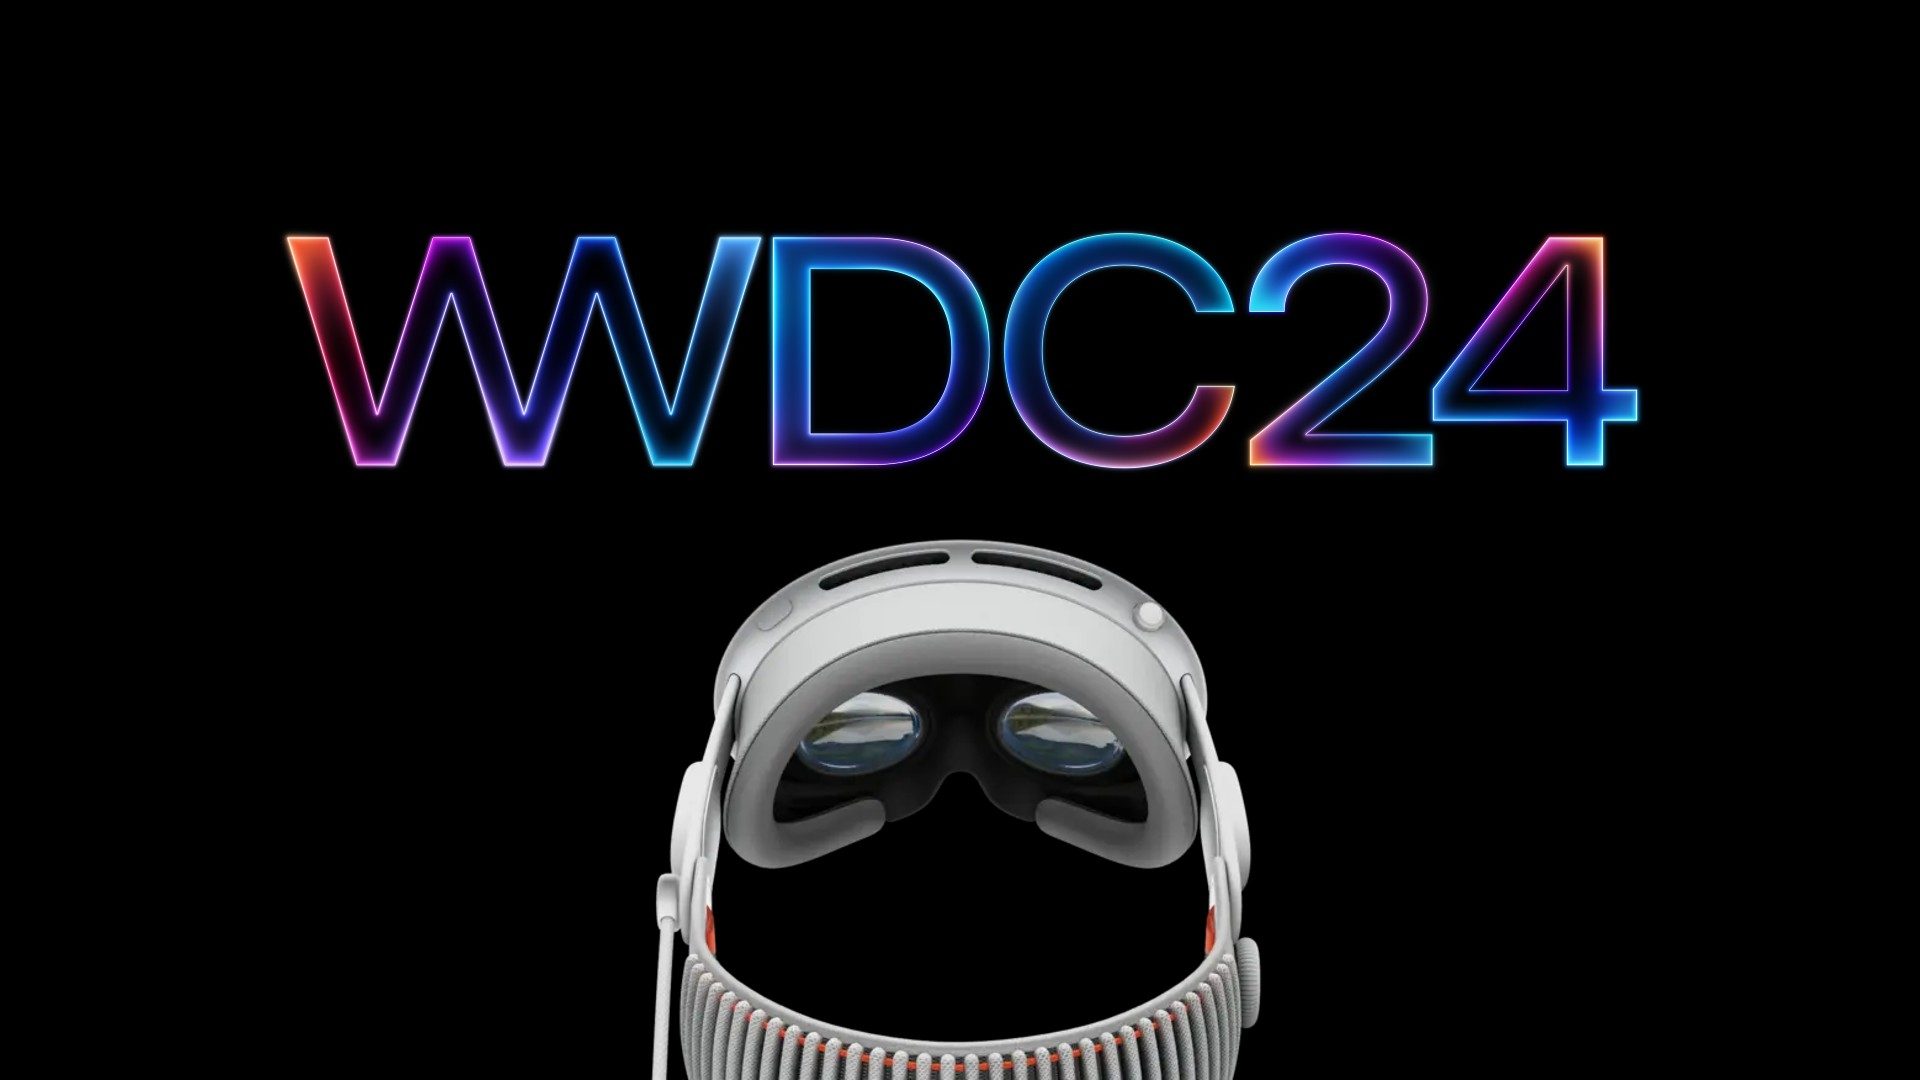 Apple announces WWDC 2024 with plans to highlight “visionOS